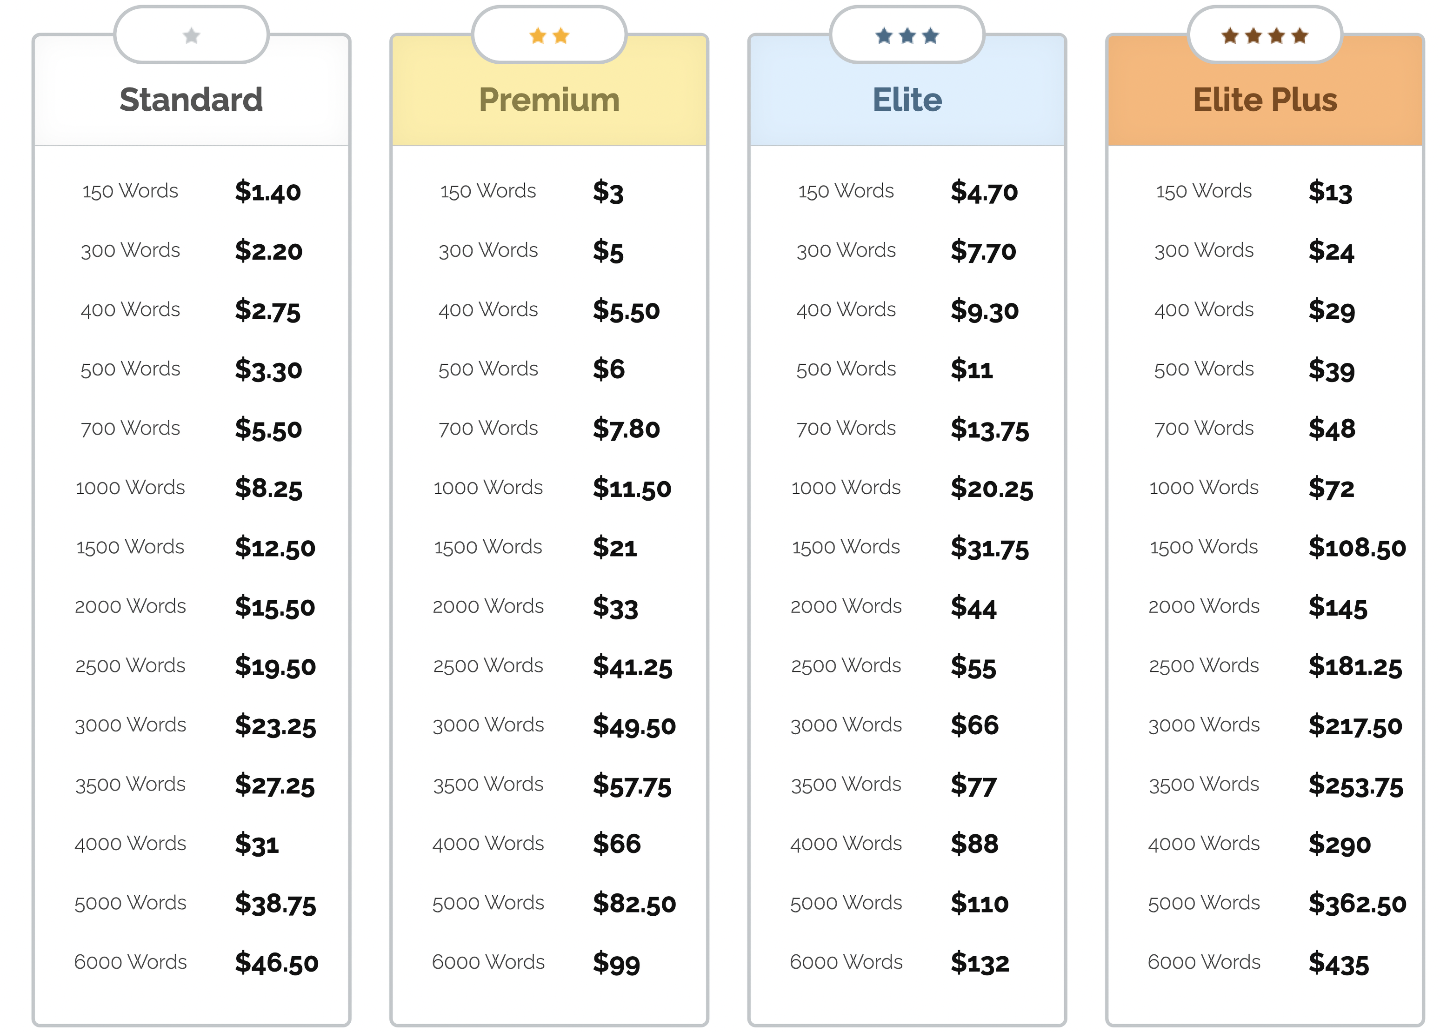 iWriter's pricing plans